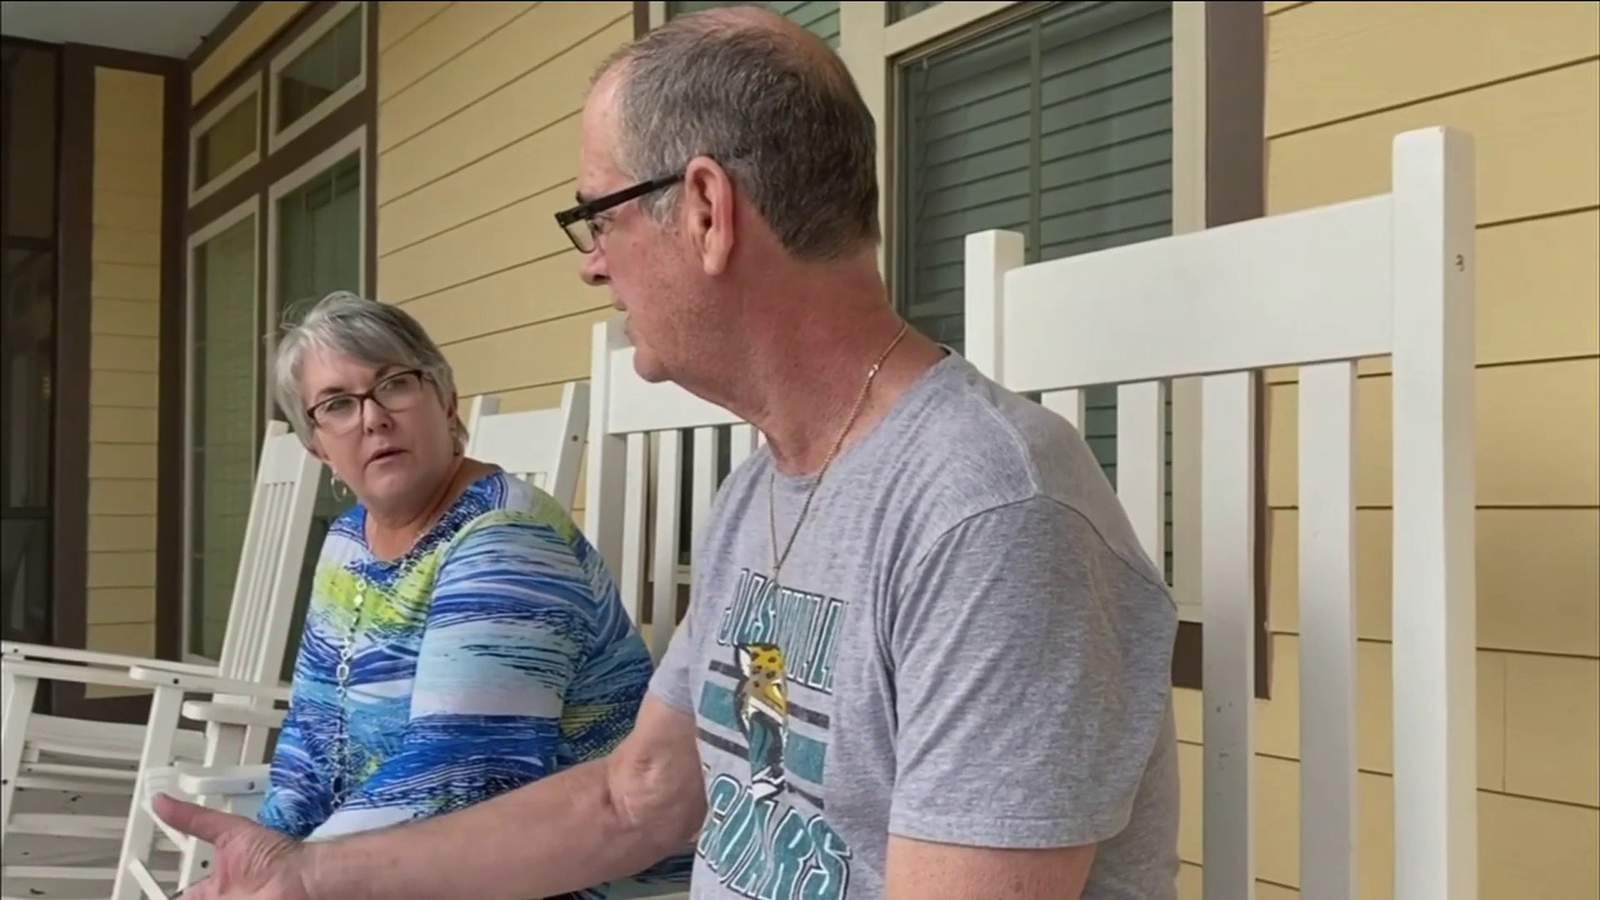 72 days and counting: Jacksonville woman desperate to see husband who is fighting Alzheimers